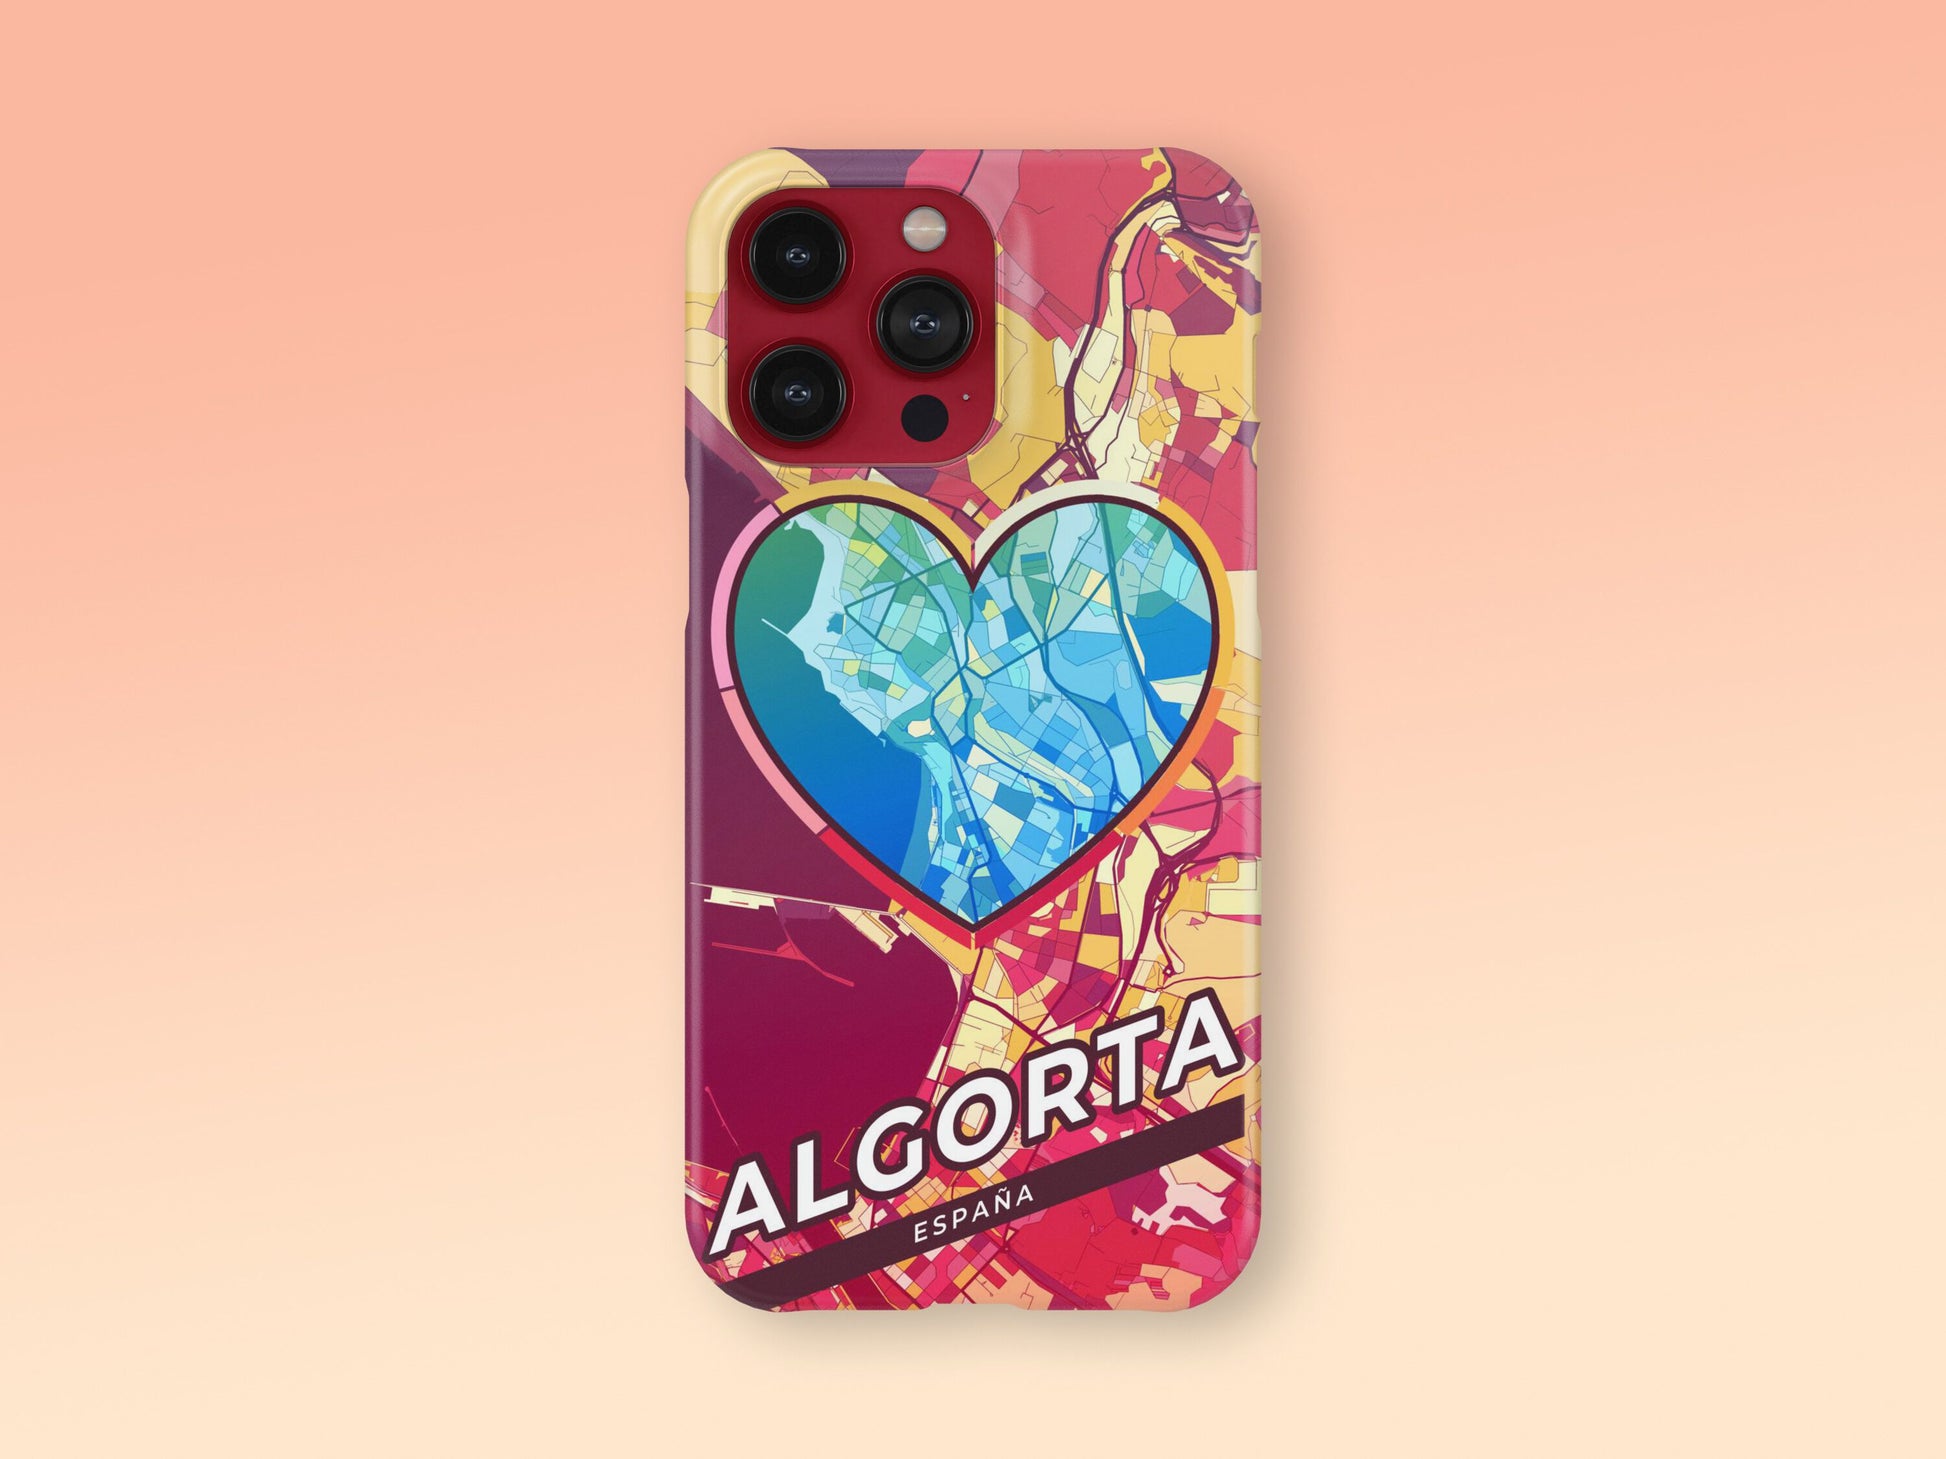 Algorta Spain slim phone case with colorful icon. Birthday, wedding or housewarming gift. Couple match cases. 2